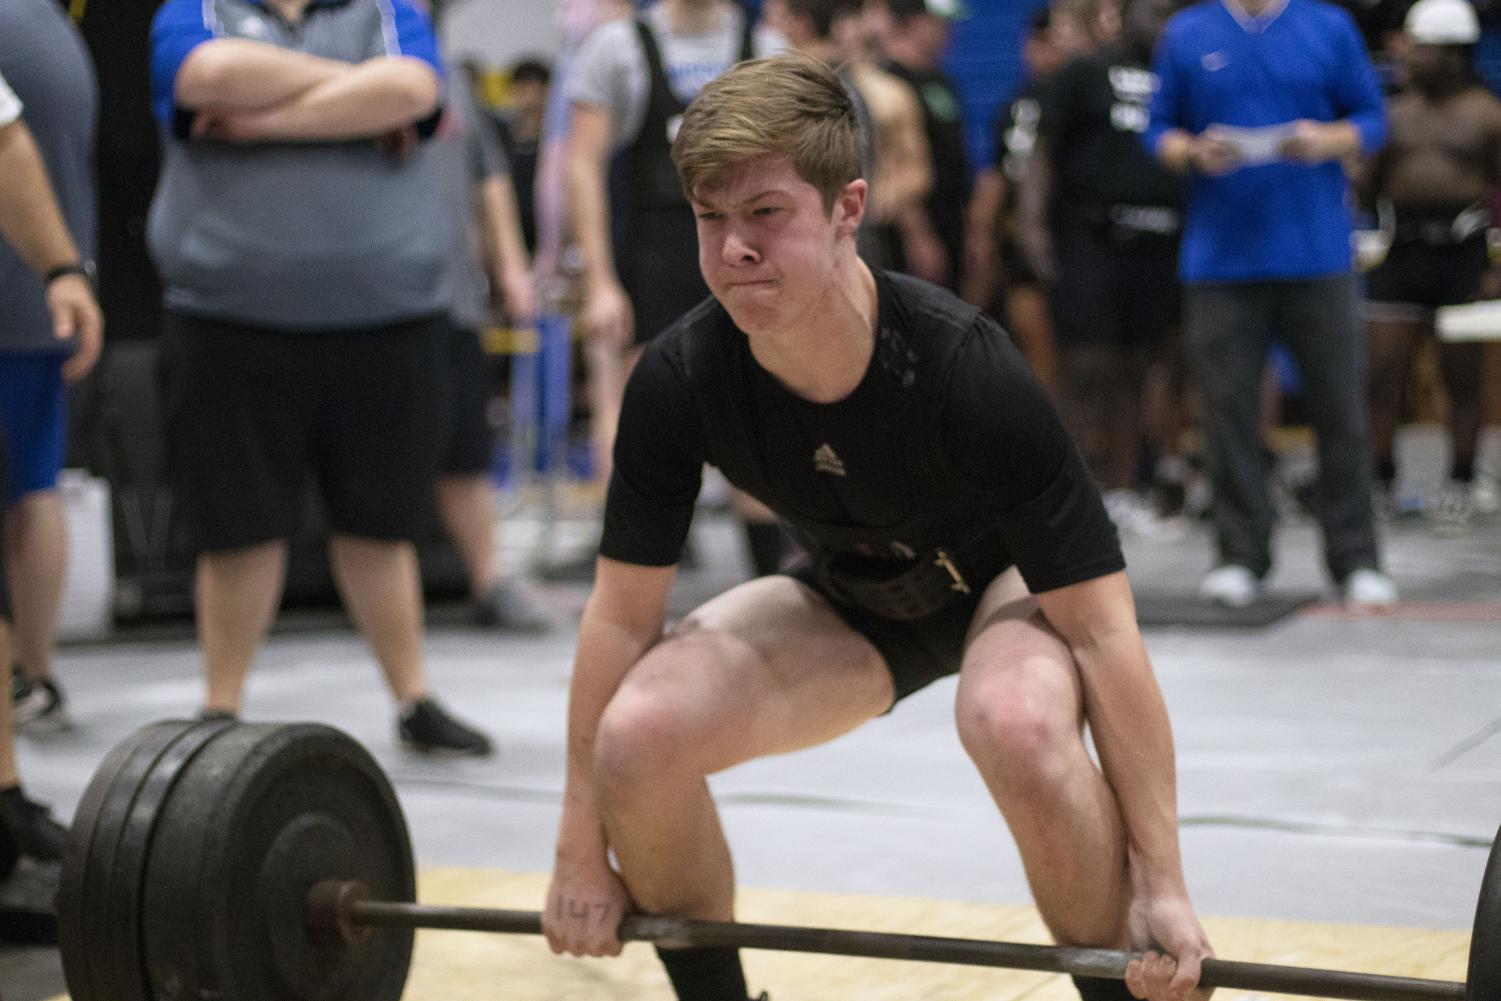 Senior Henry Waggoner lifts the bar off the ground. This was at one of the recent powerlifting meets.